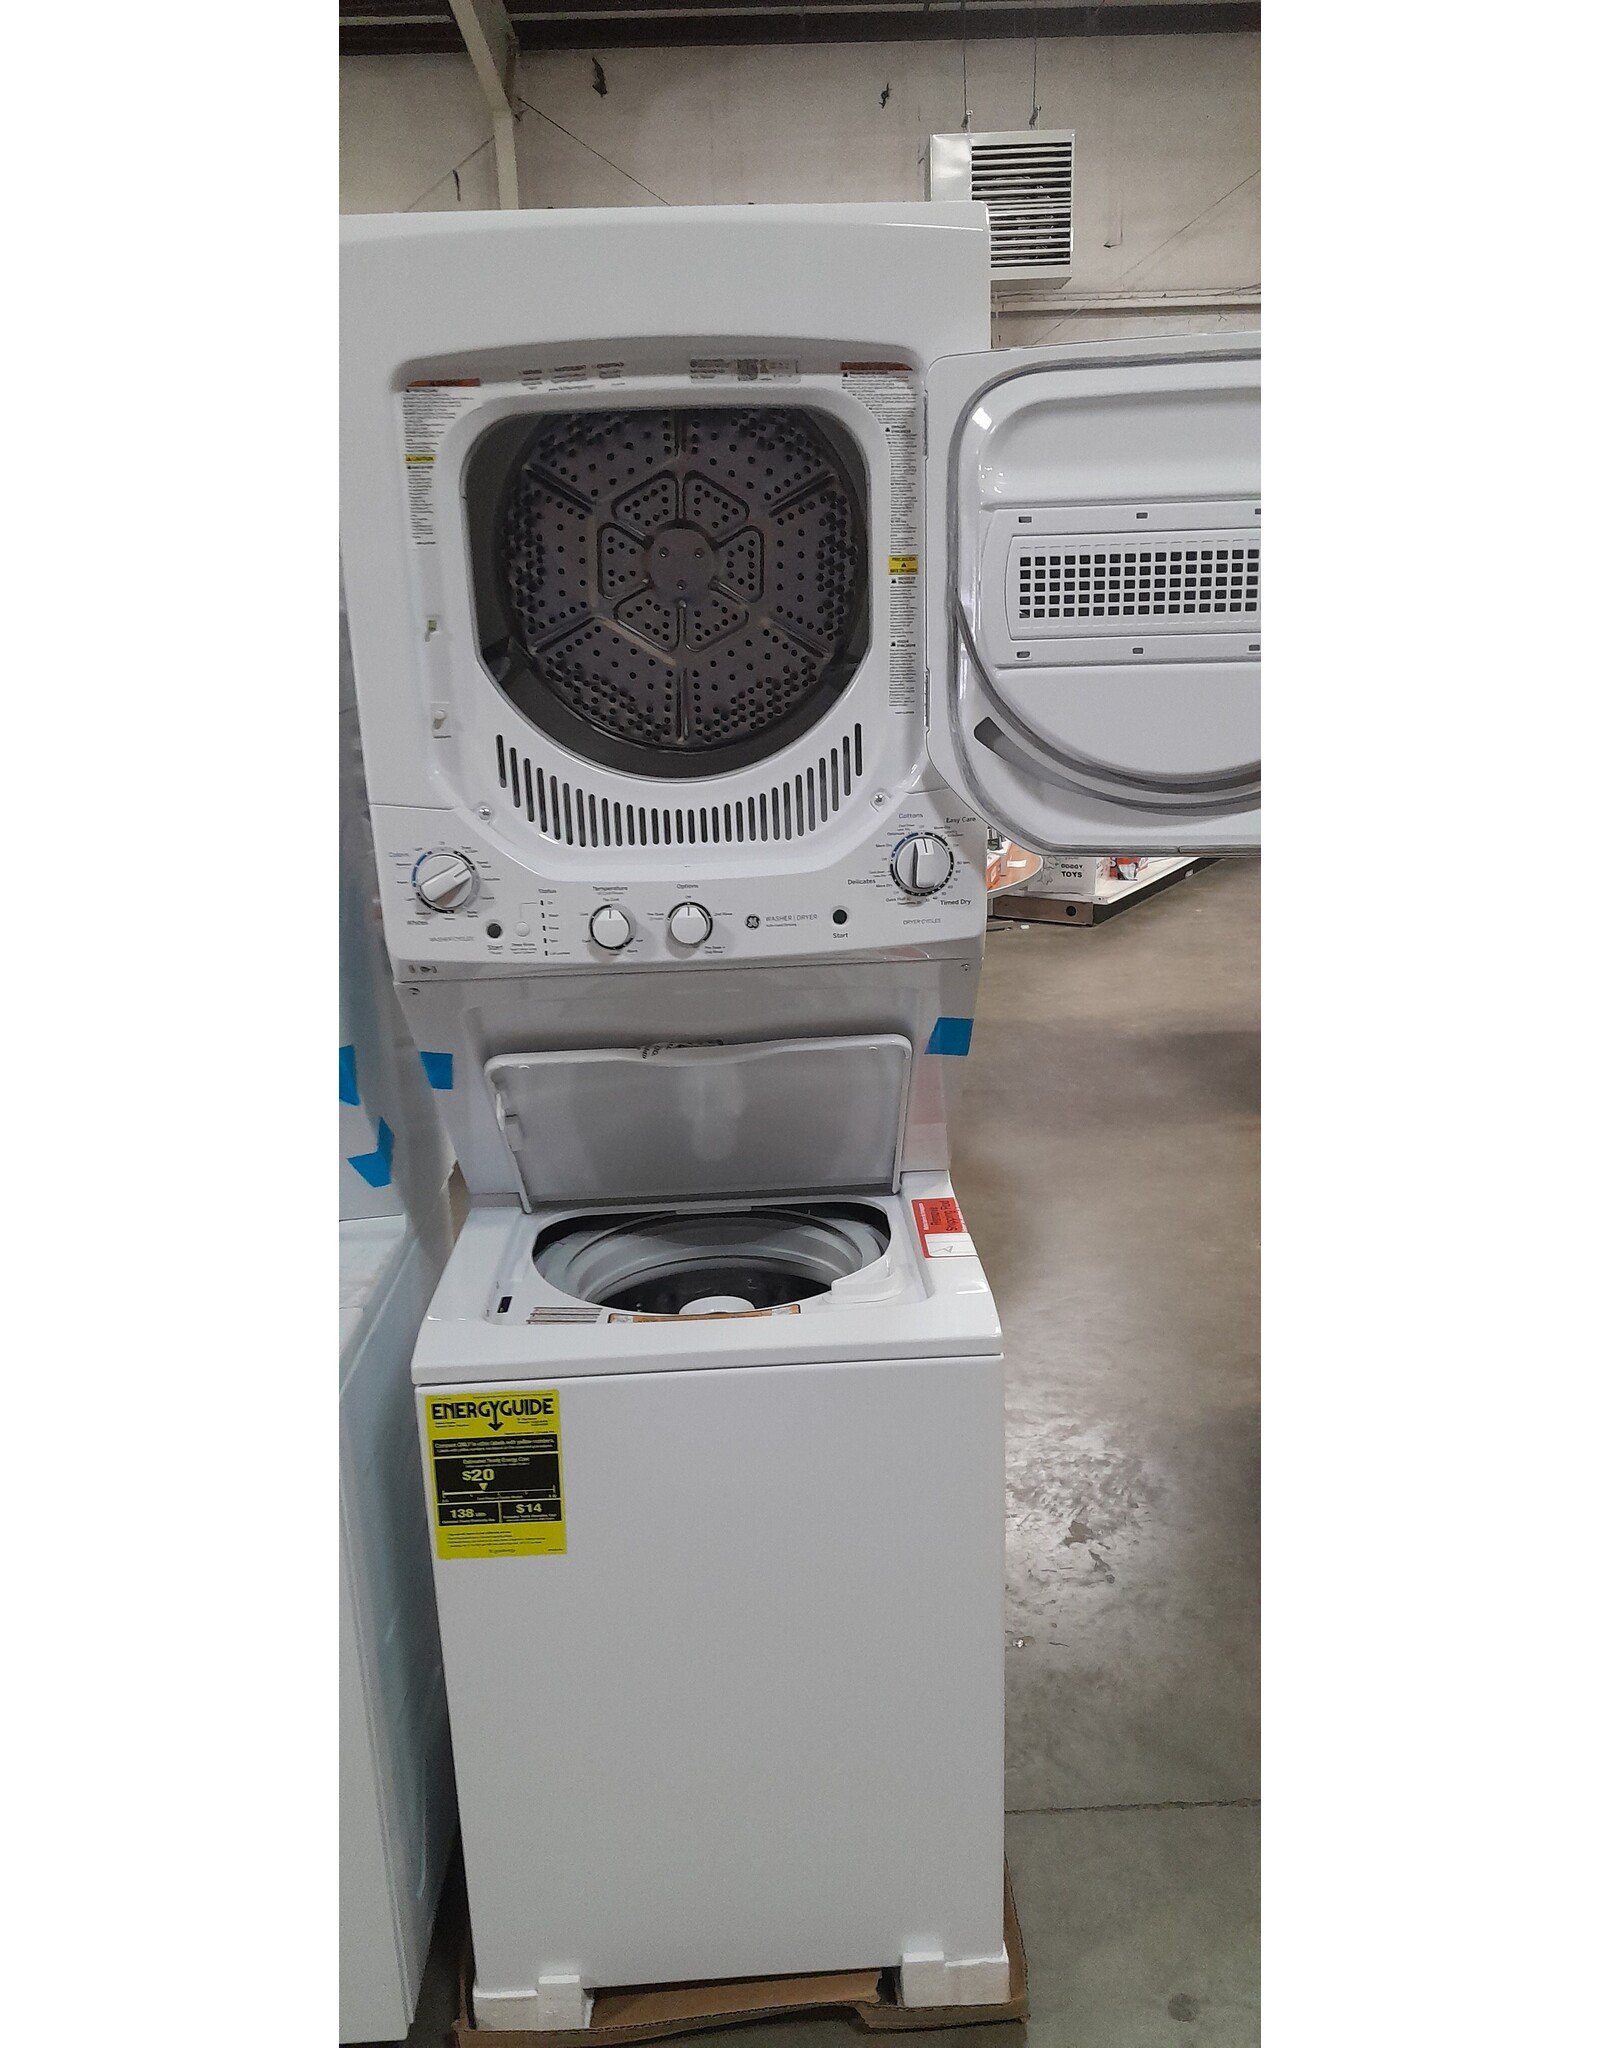 Climatic NEW GE Stacker Washer Dryer Laundry Center GUD24ESSMWW